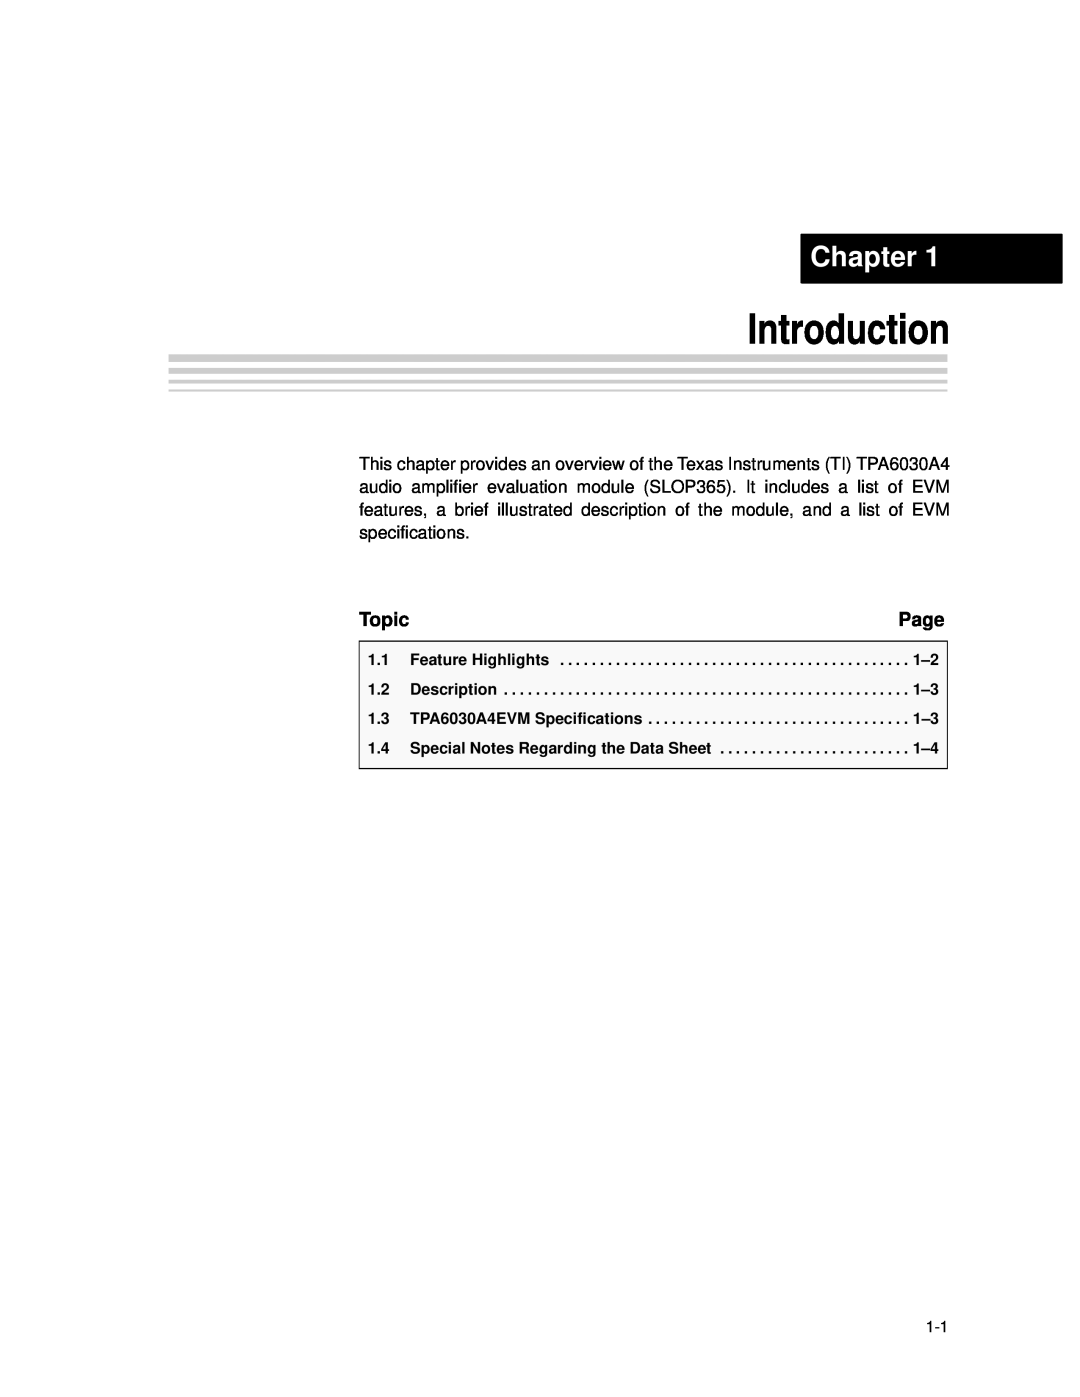 Texas Instruments TPA6030A4 manual Introduction, Chapter, Page, Topic 